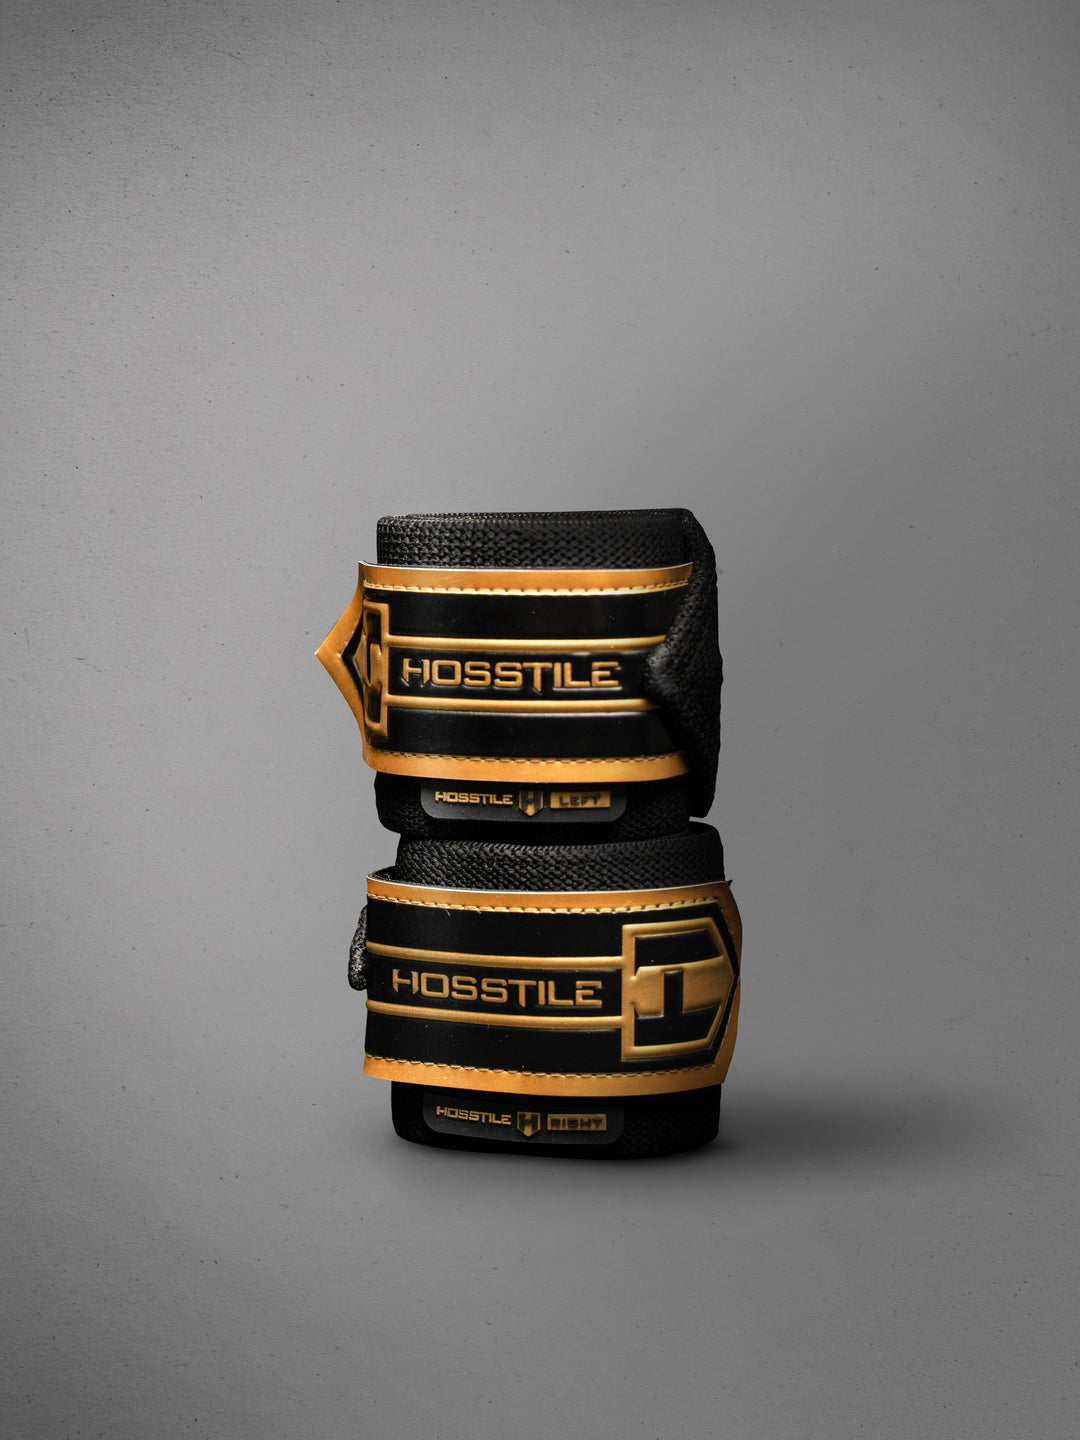 Hosstile Heavy Duty Strength Wrist Wraps for bodybuilders and weight lifters